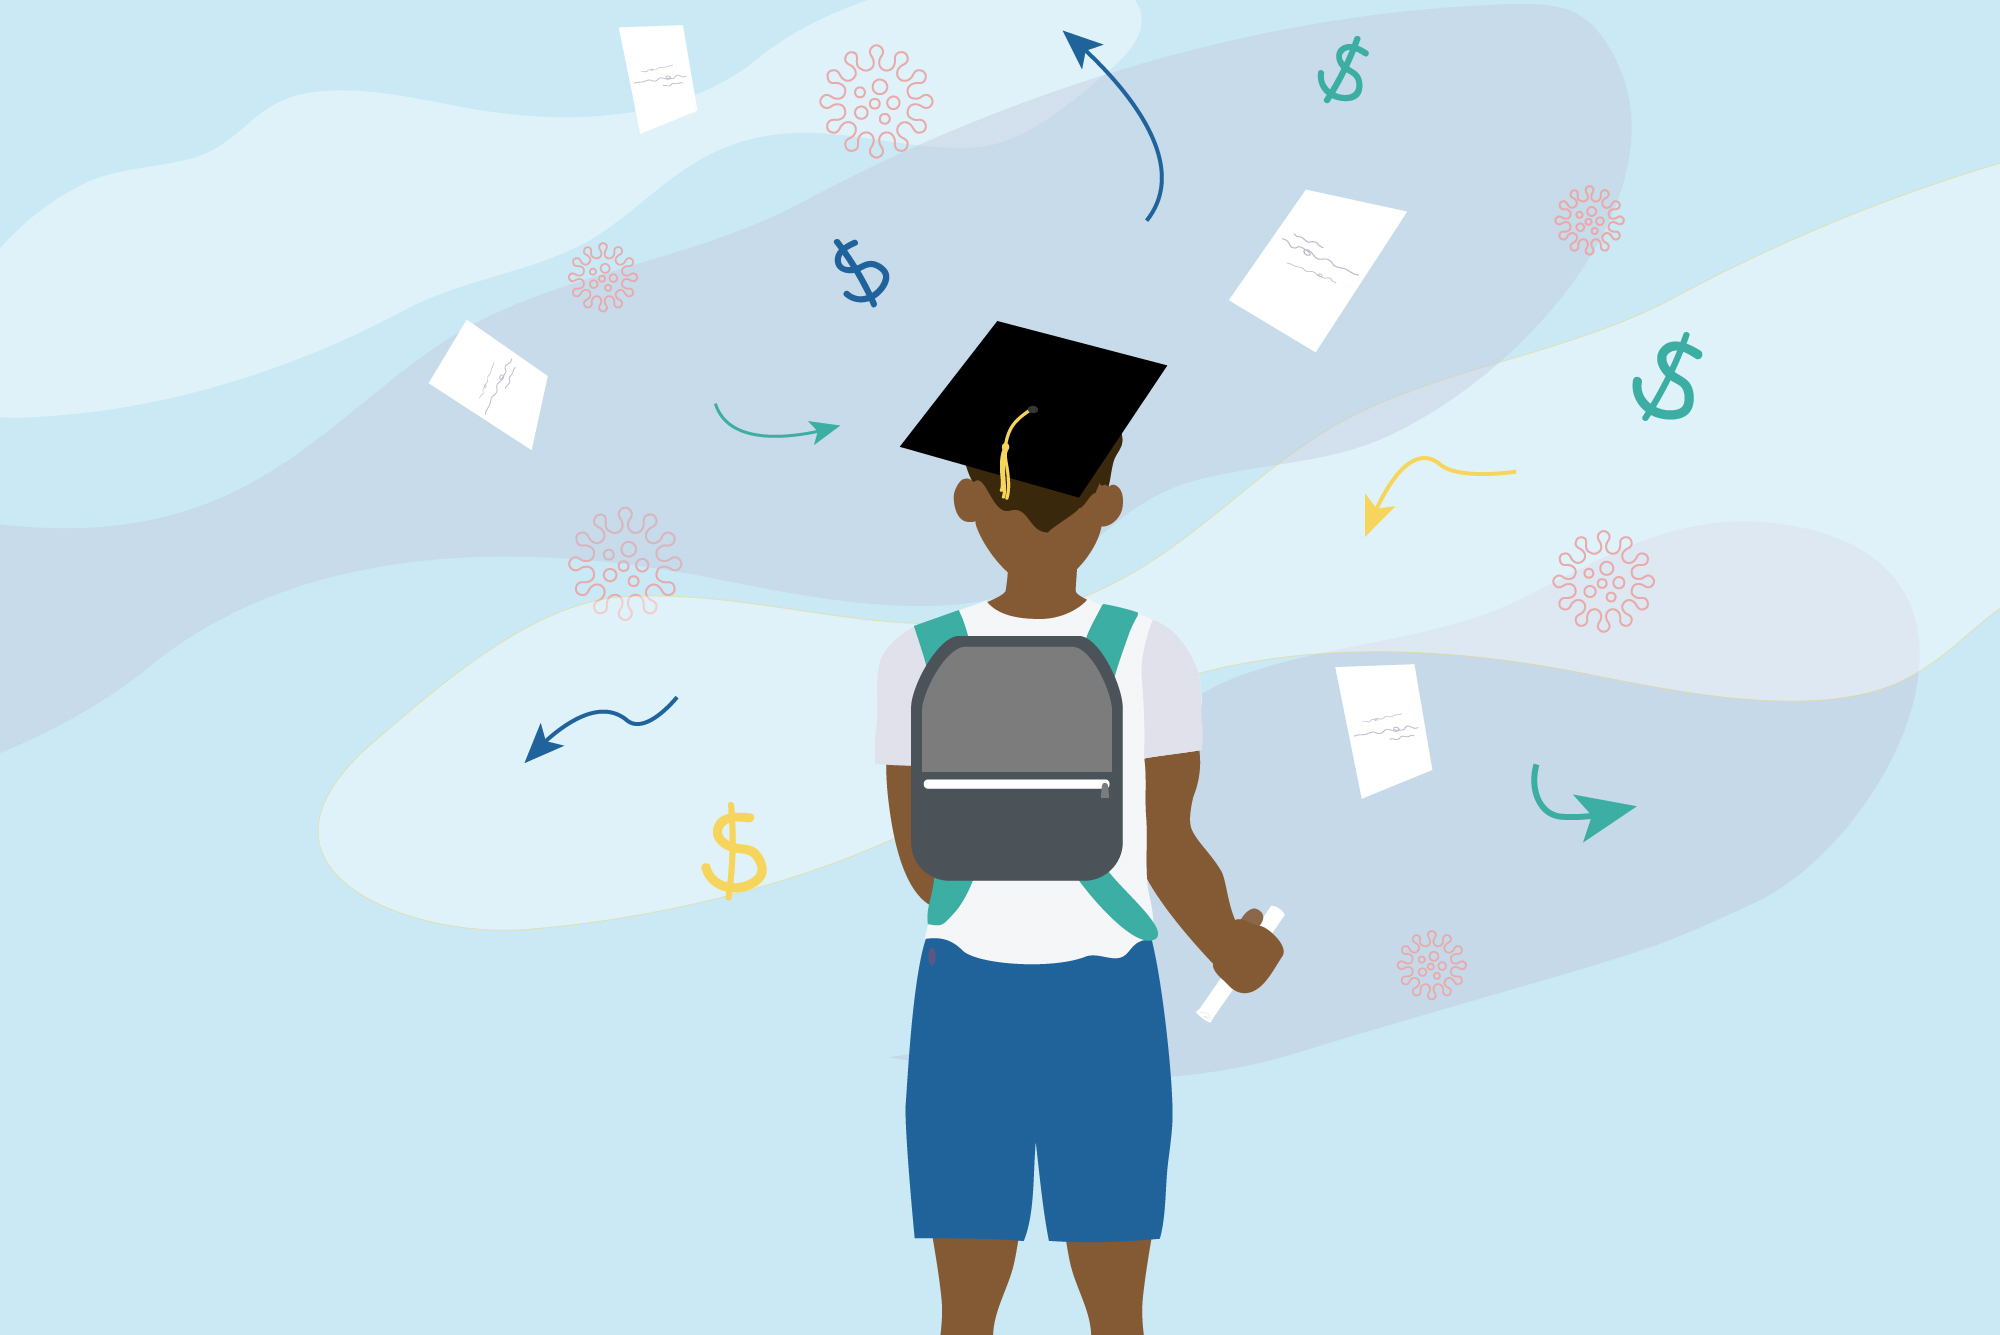 Illustration of a student standing in a black graduation cap, diploma in hand, with a gray backpack and blue shorts, looking of into a cloud of uncertainty. The cloud has pieces of paper flying, arrows, coronavirus icons, and money signs, to signify the difficulty of finding a job after graduating in 2020.